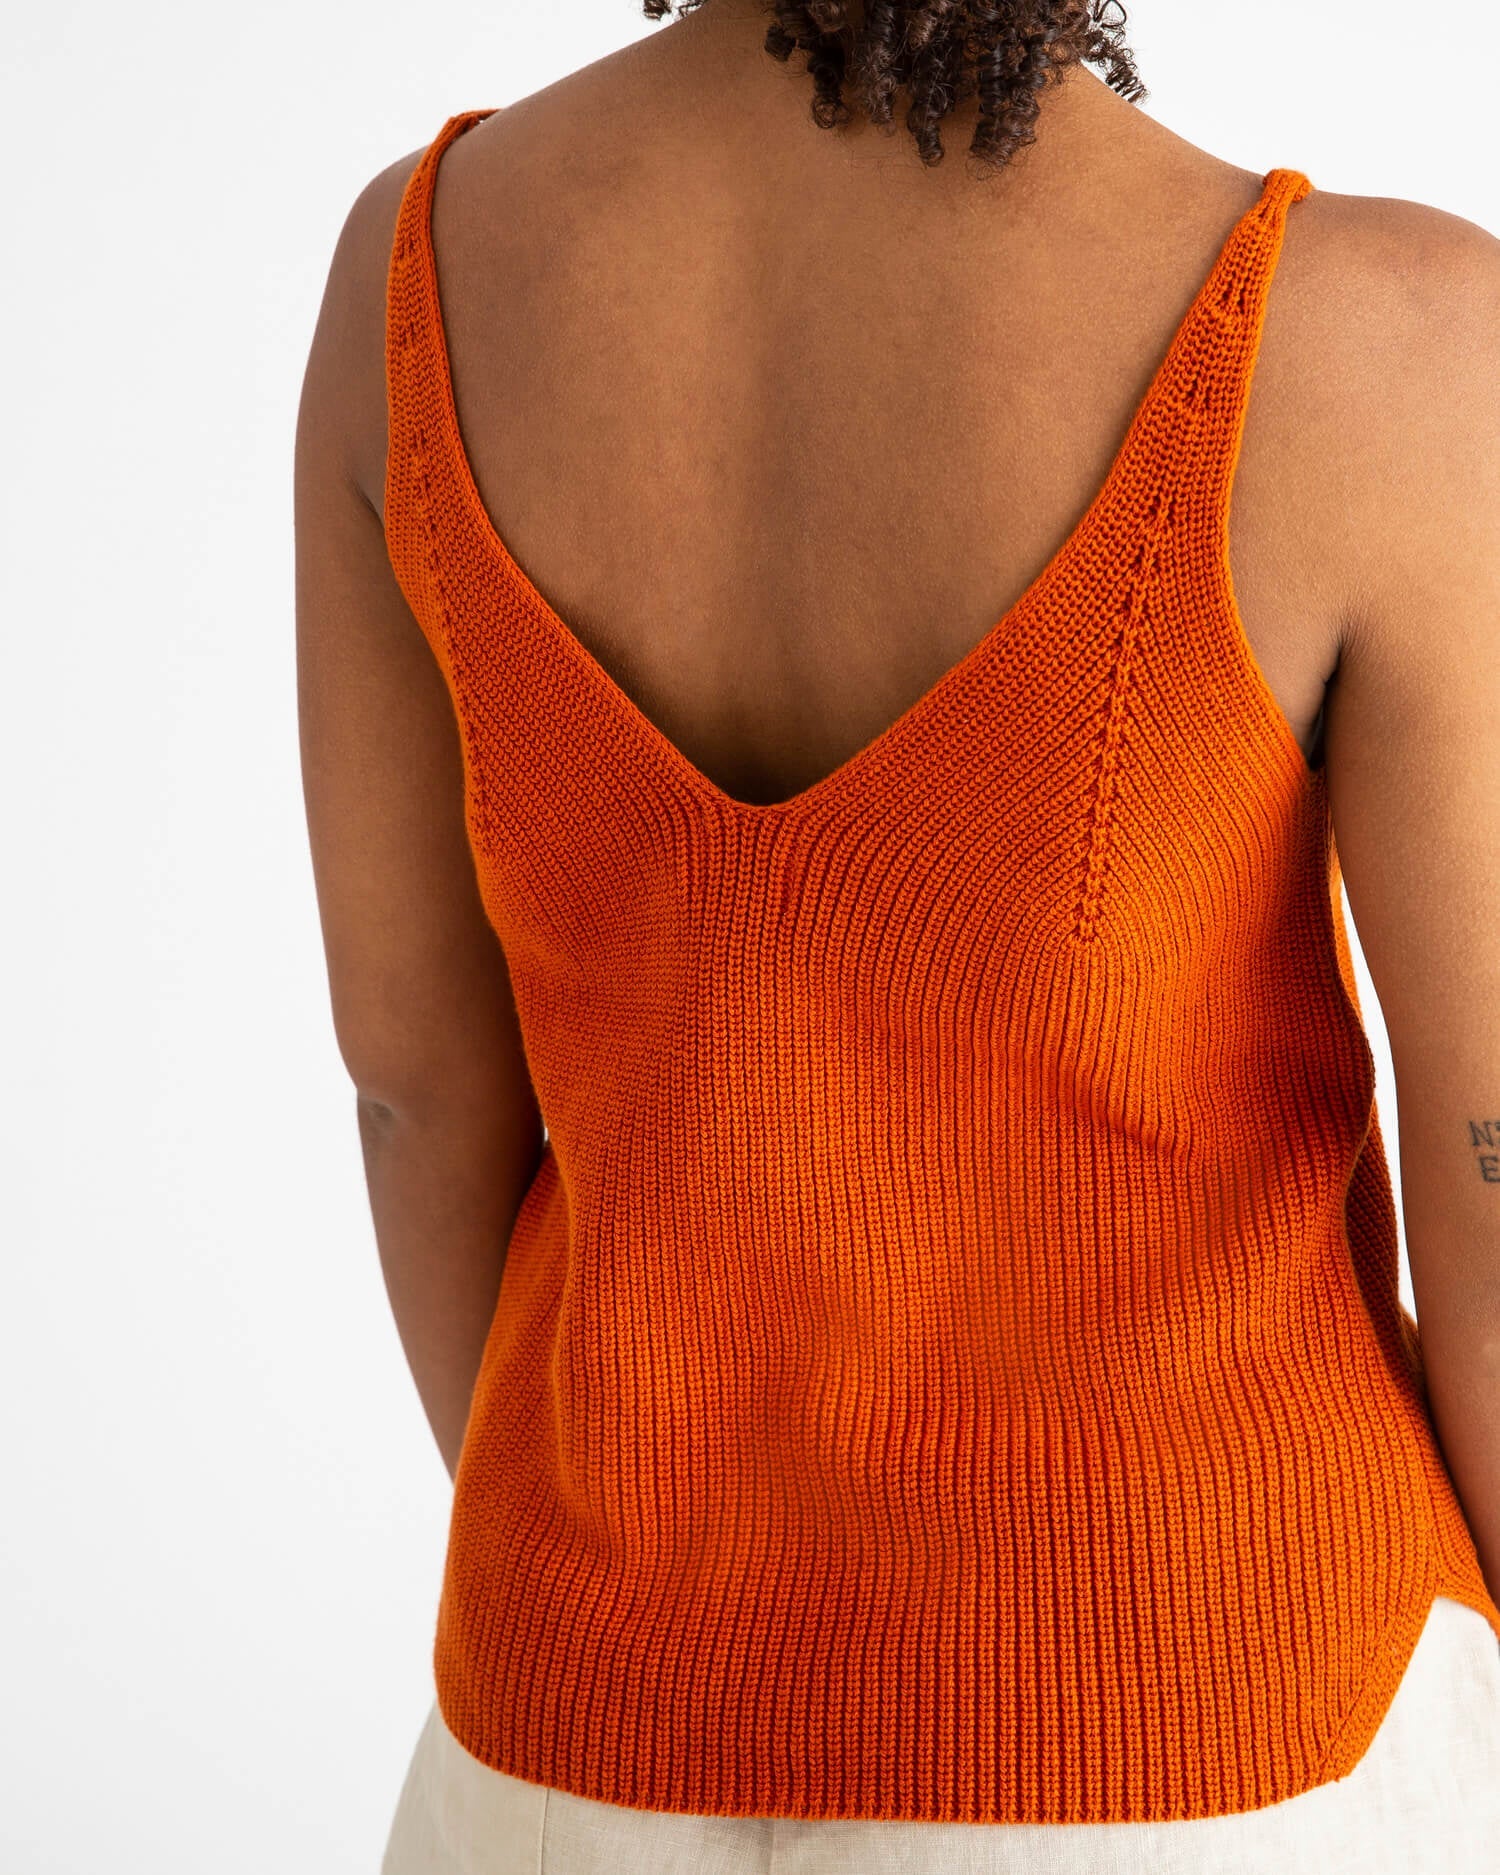 Orange, knitted tank top made from 100% organic cotton by Matona